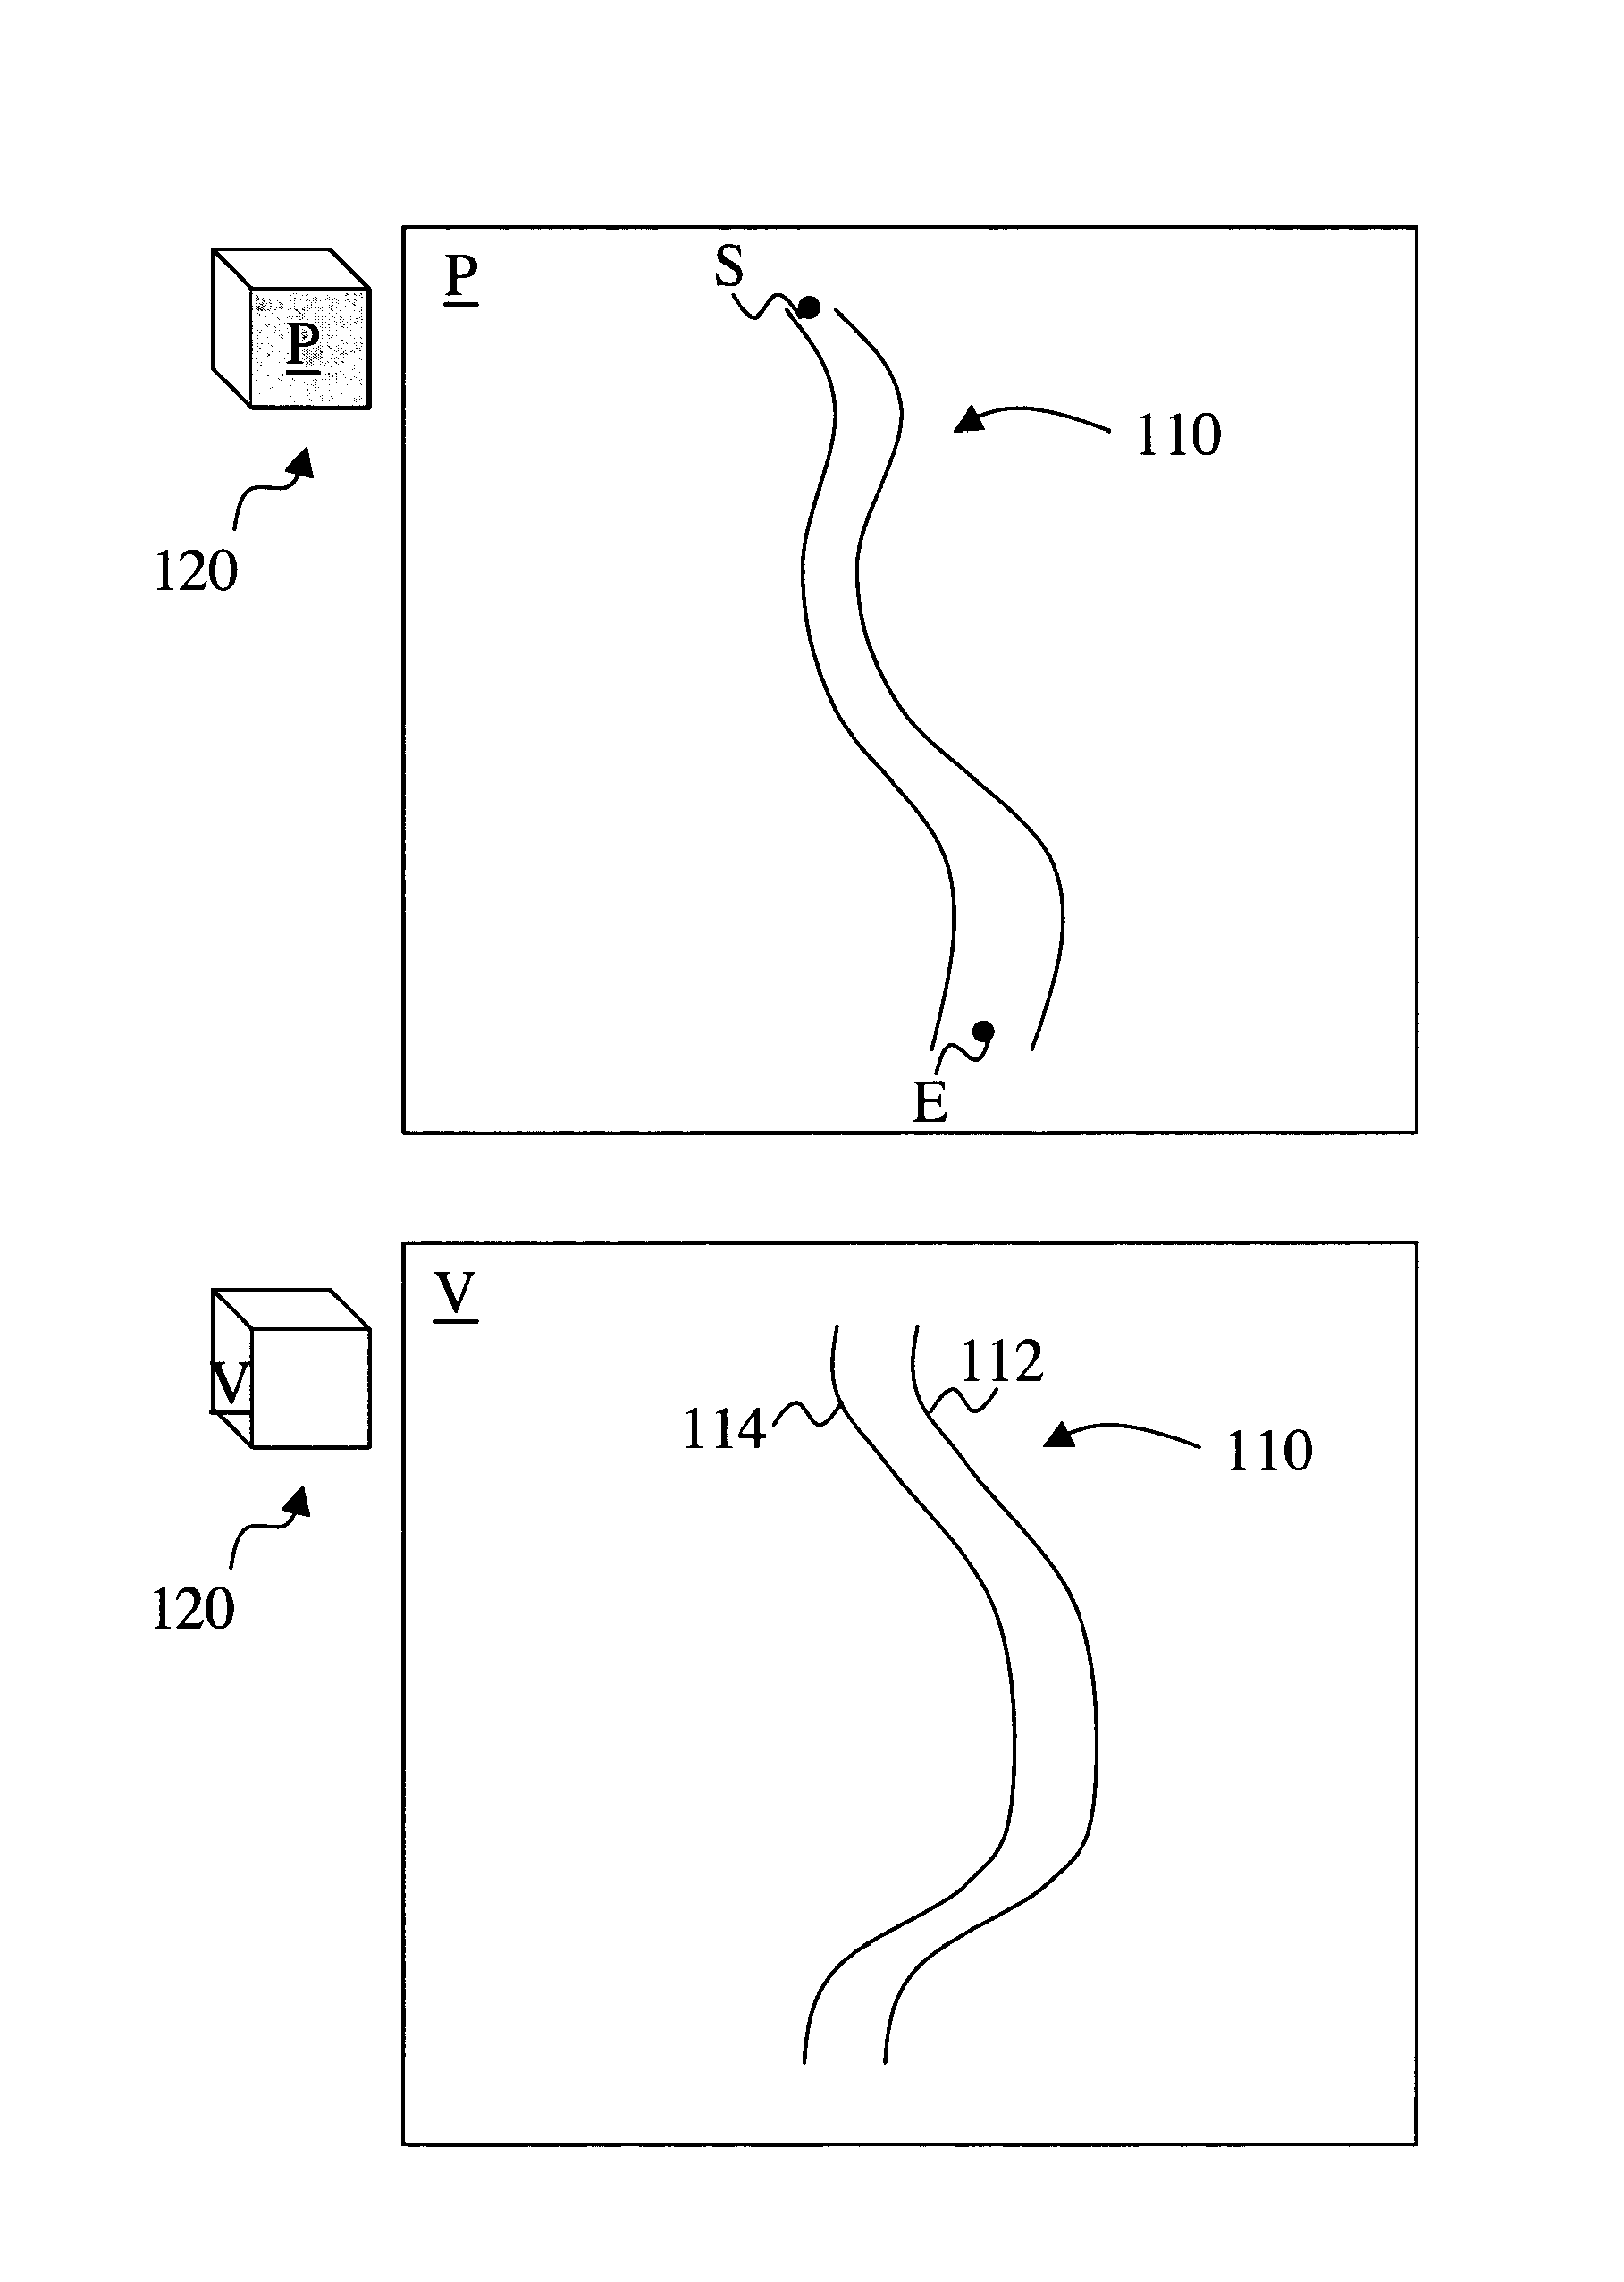 Curved-slab maximum intensity projections